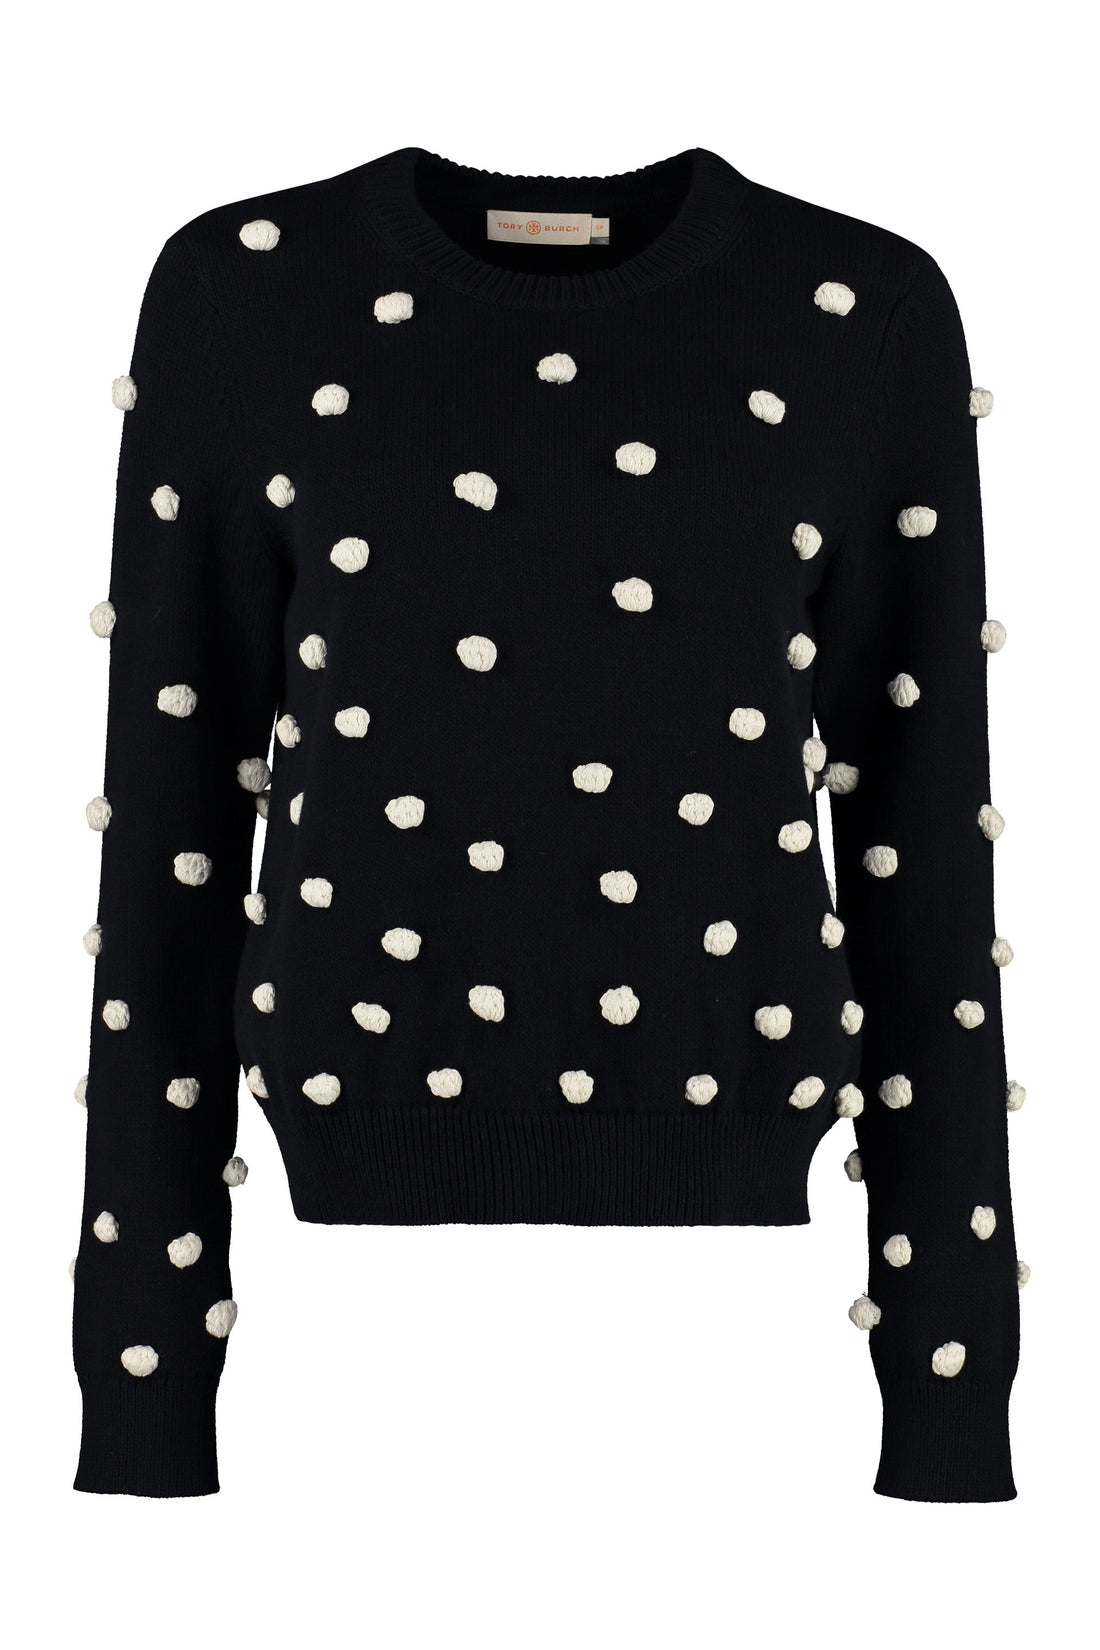 Tory Burch-OUTLET-SALE-Tricot sweater with pom-poms-ARCHIVIST